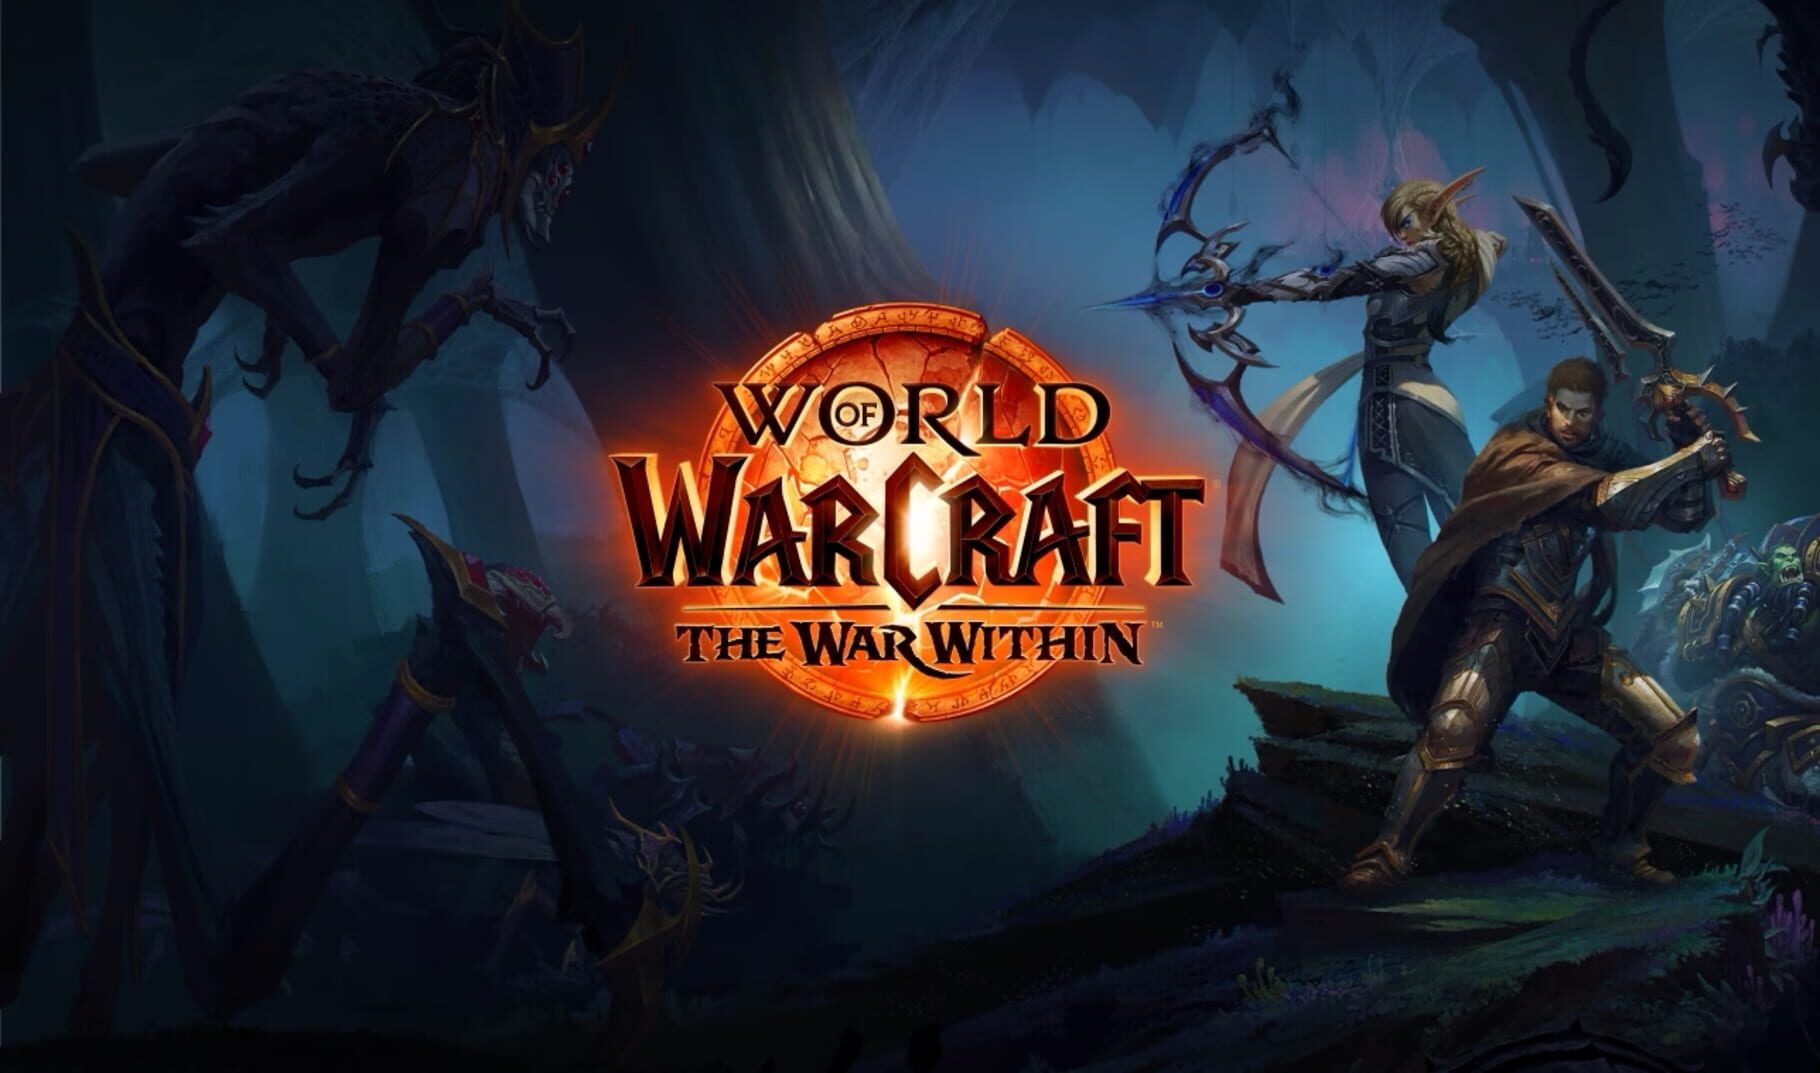 Arte - World of Warcraft: The War Within